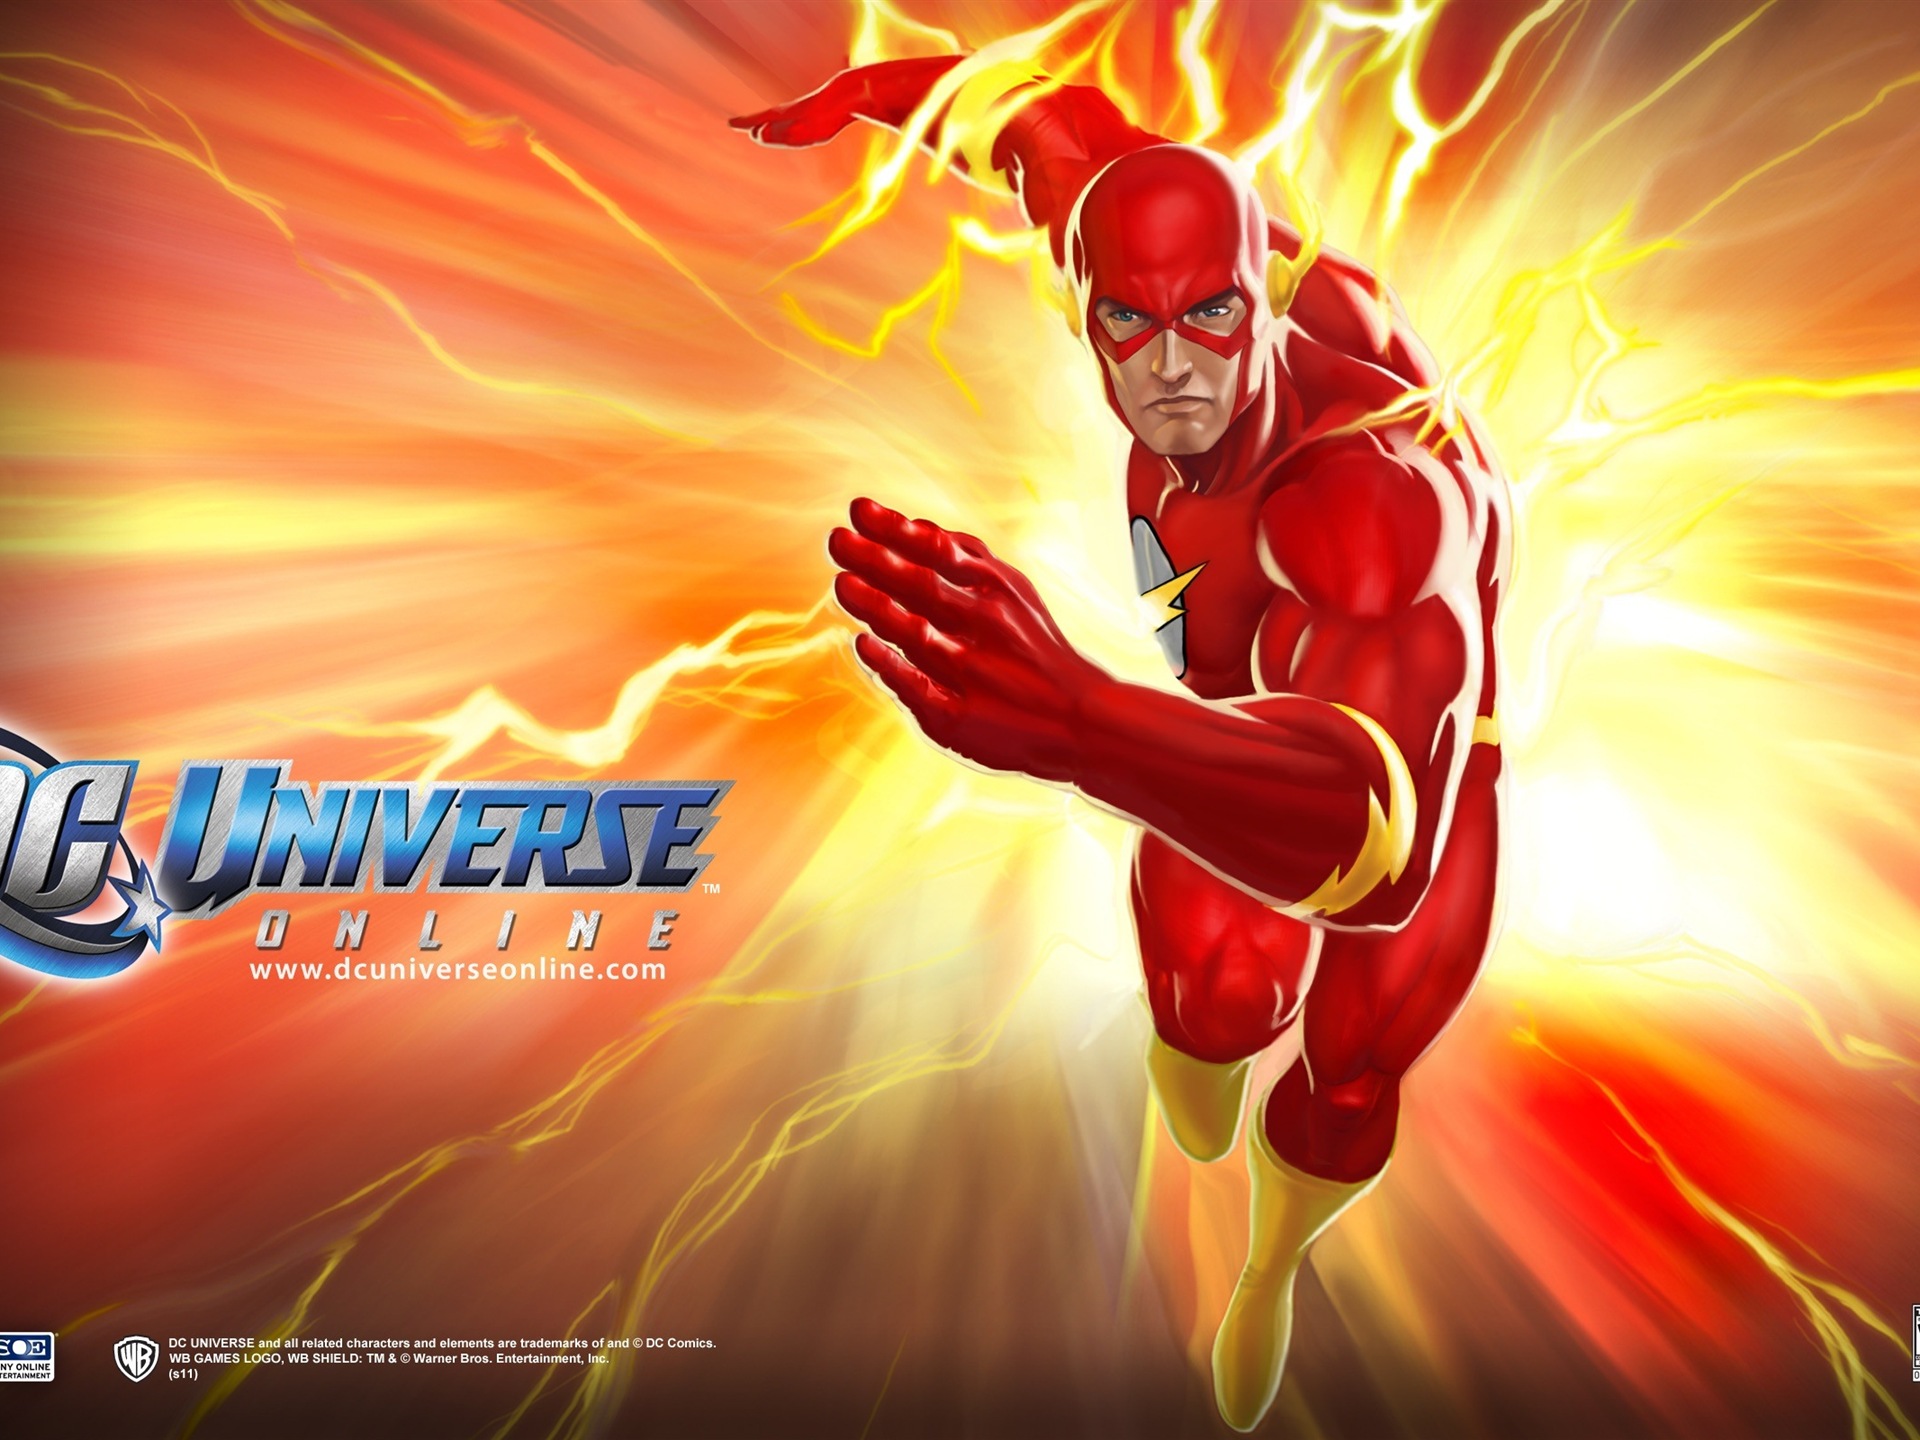 DC Universe Online HD game wallpapers #16 - 1920x1440